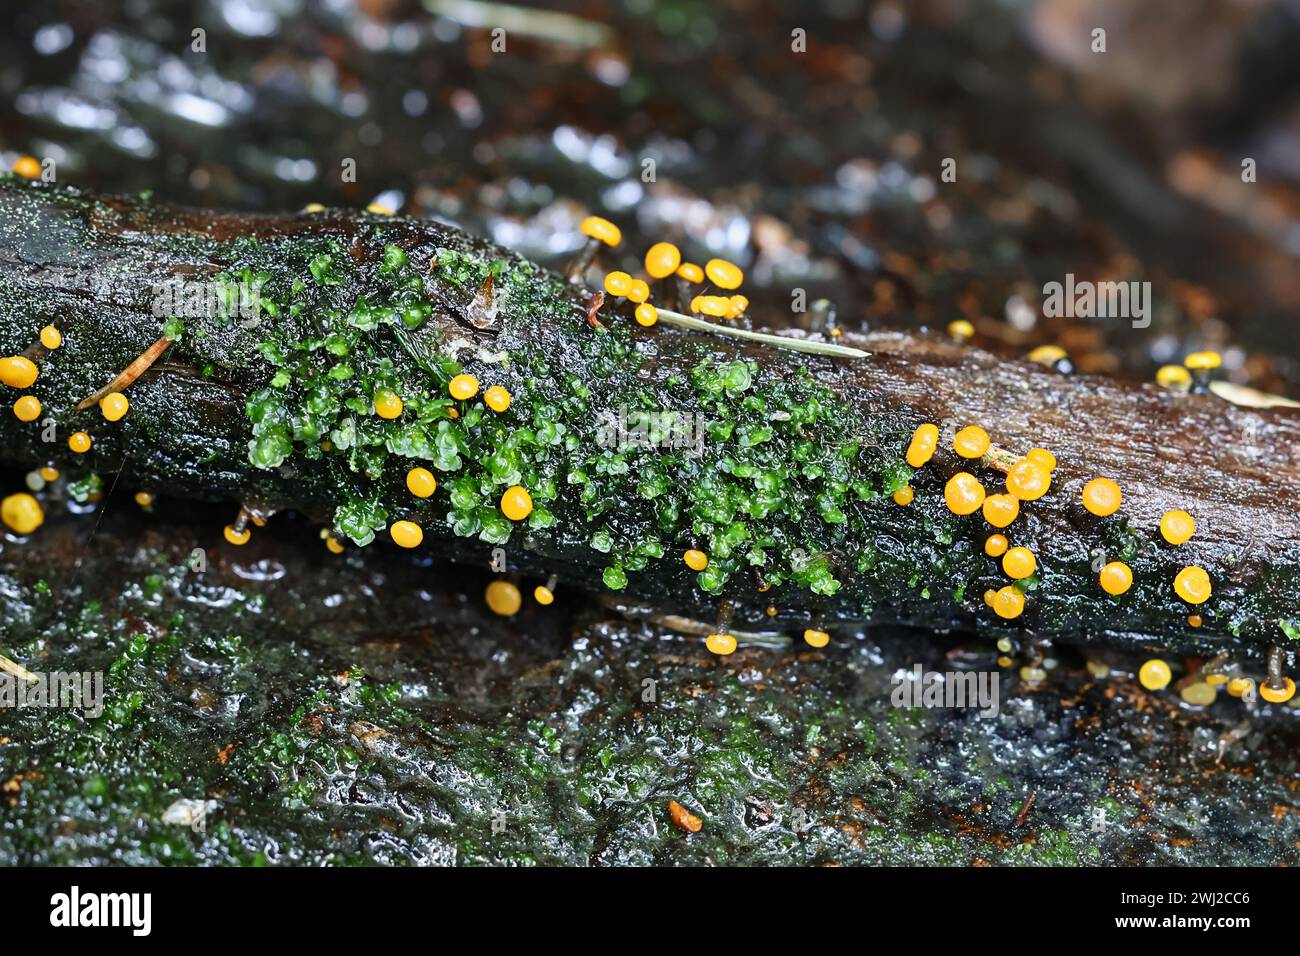 Vibrissea truncorum, a sac fungus with no common English name growing in forest streams in Finland during springtime Stock Photo